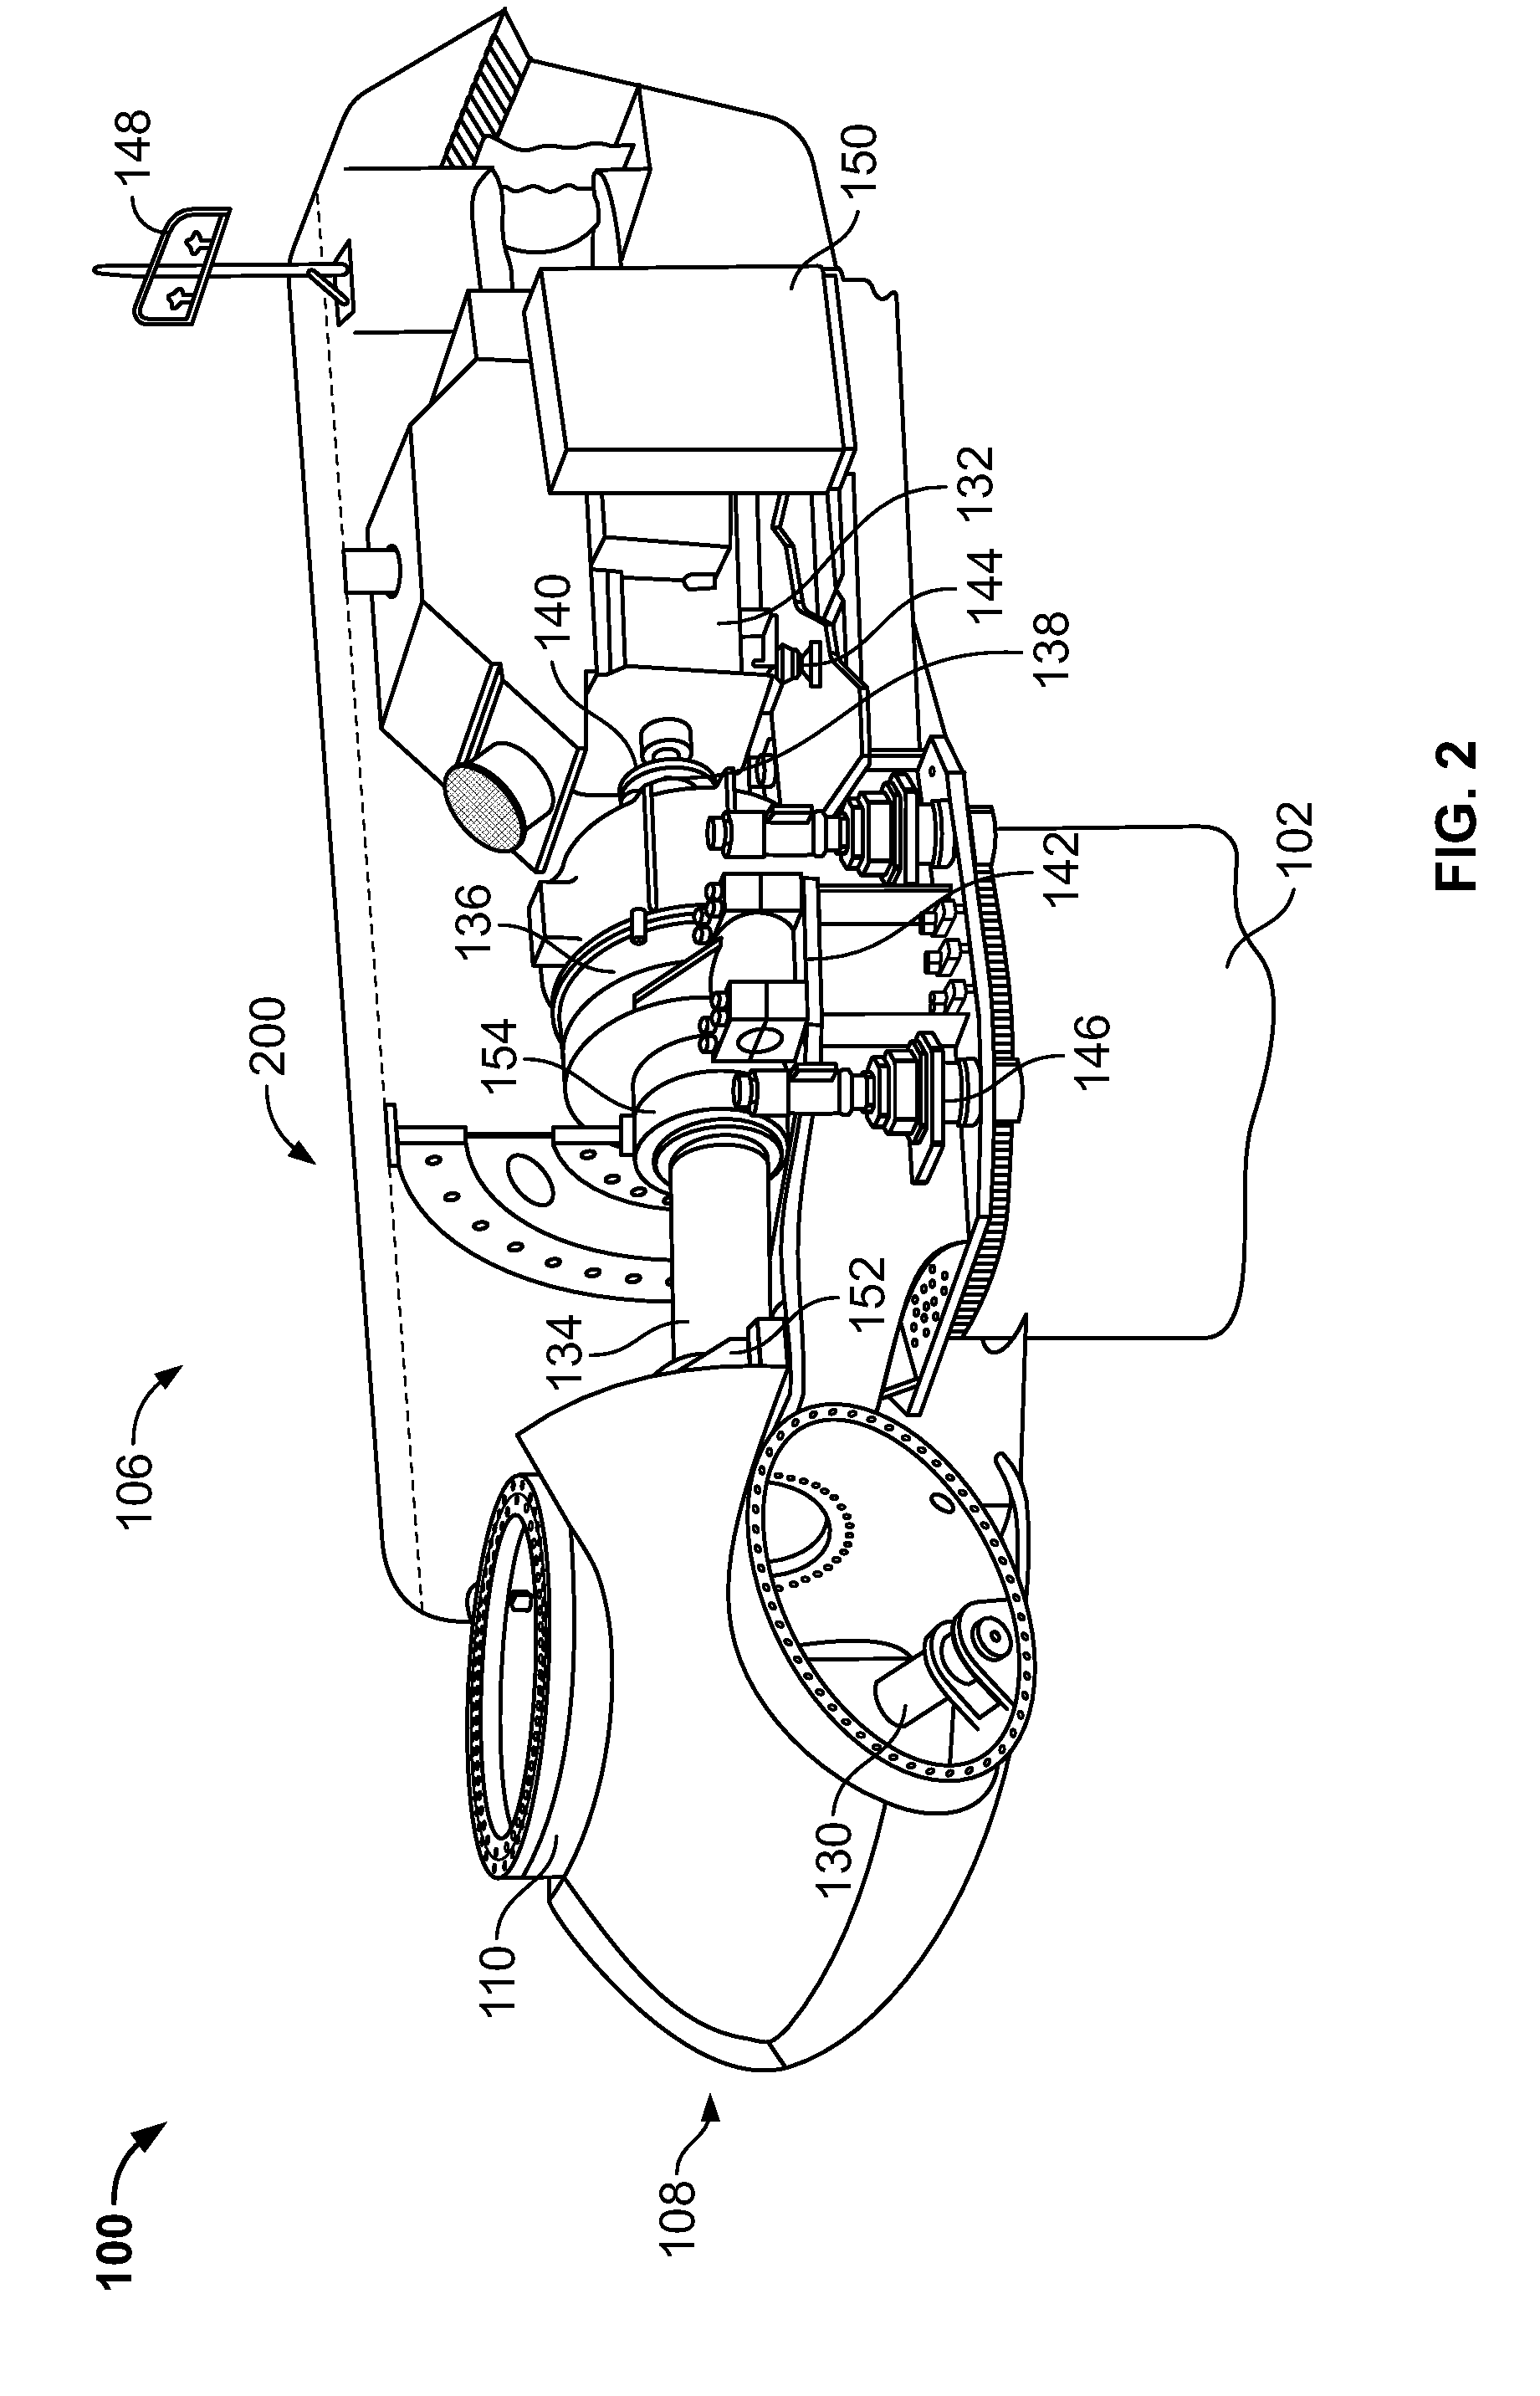 Methods and apparatus for assembling and operating semi-monocoque rotary machines